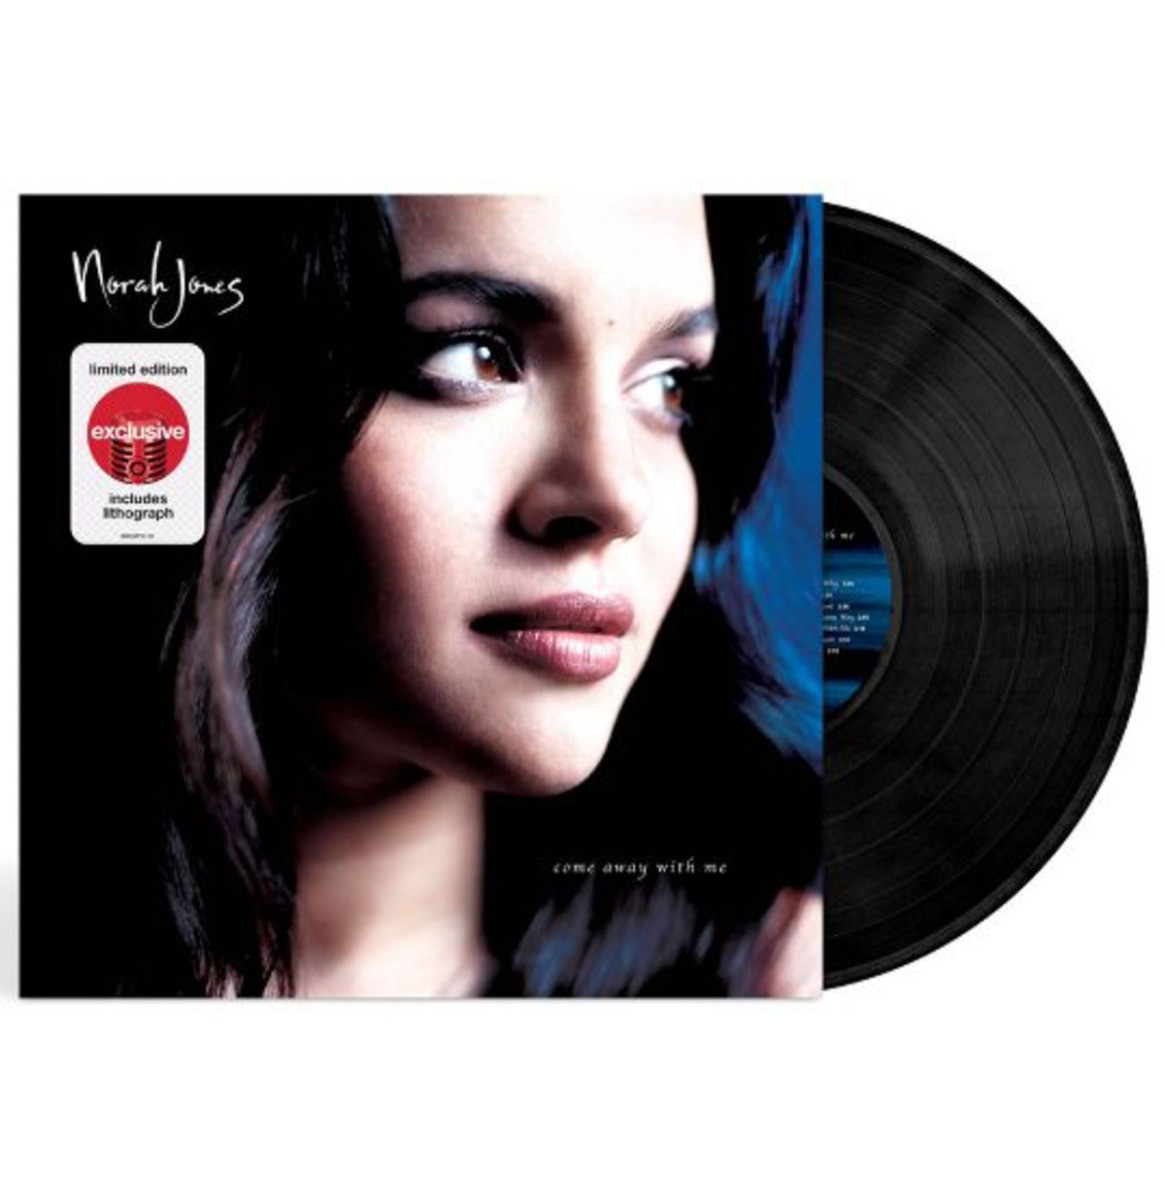 Norah Jones - Come Away With Me (Inclusief Lithograph) (Target Exclusive) LP